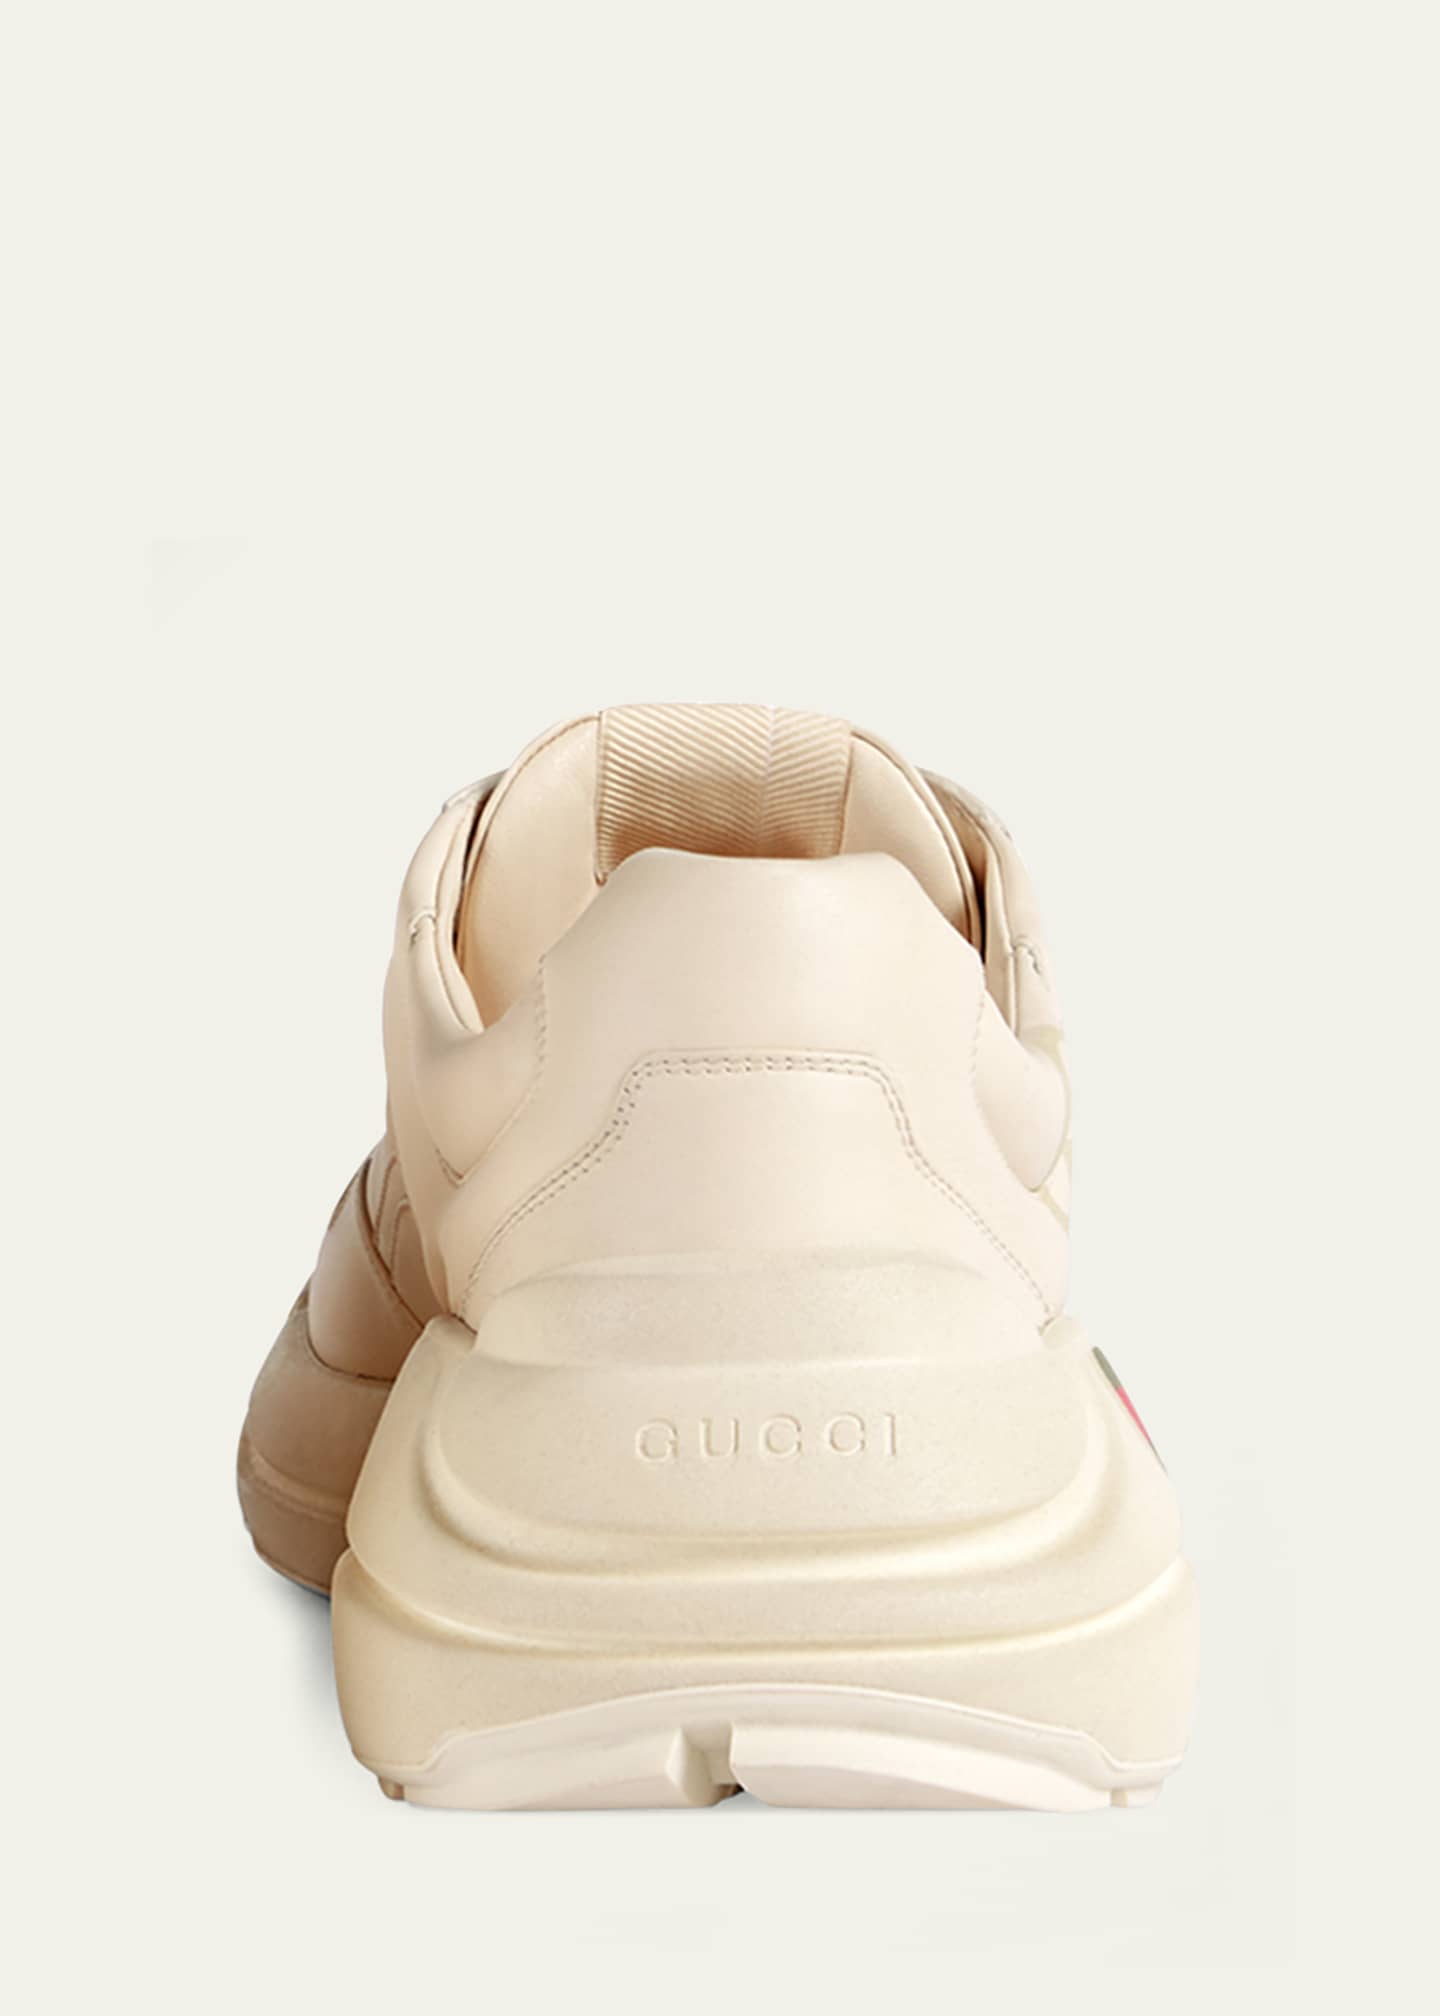 Gucci Men's Rhyton Logo Leather Sneakers Image 2 of 2